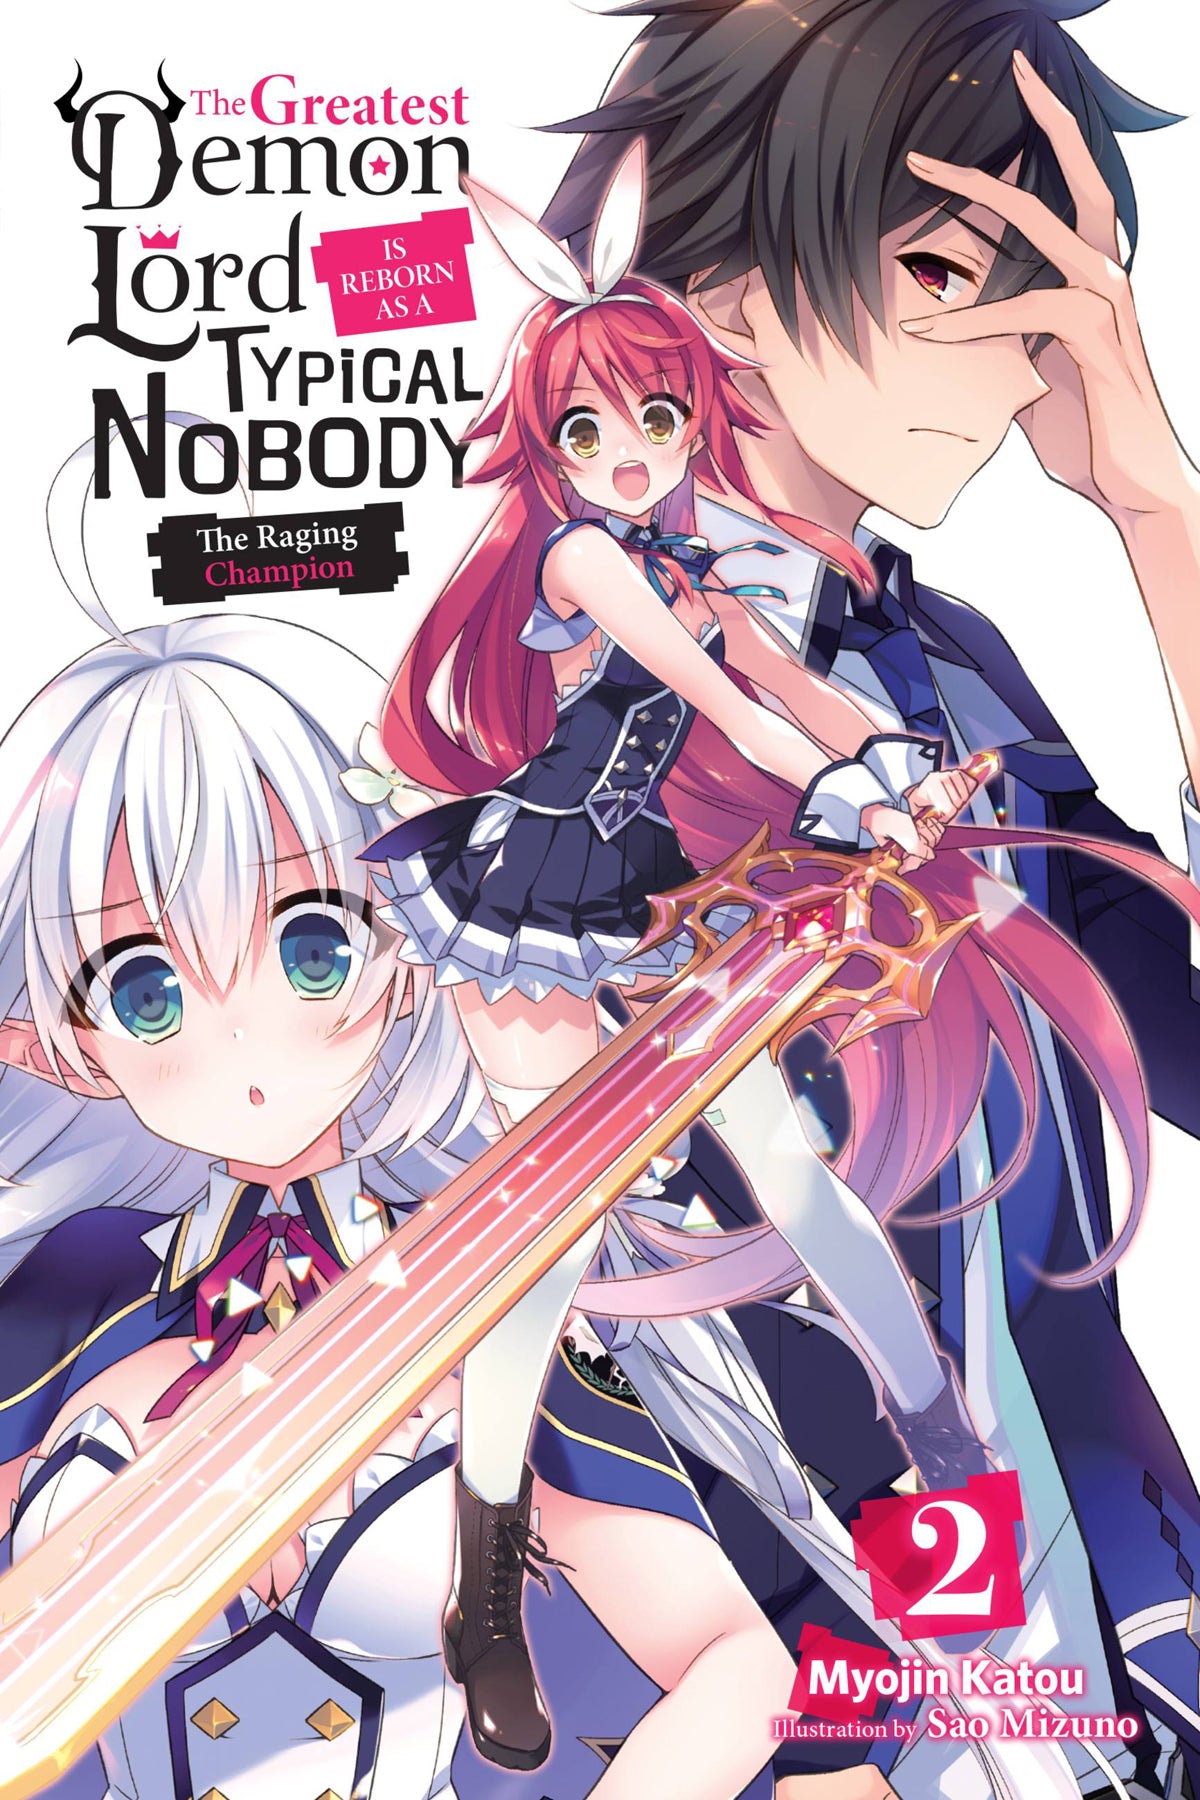 The Greatest Demon Lord Is Reborn as a Typical Nobody Vol. 01 (Light Novel): The Myth-Killing Honor Student